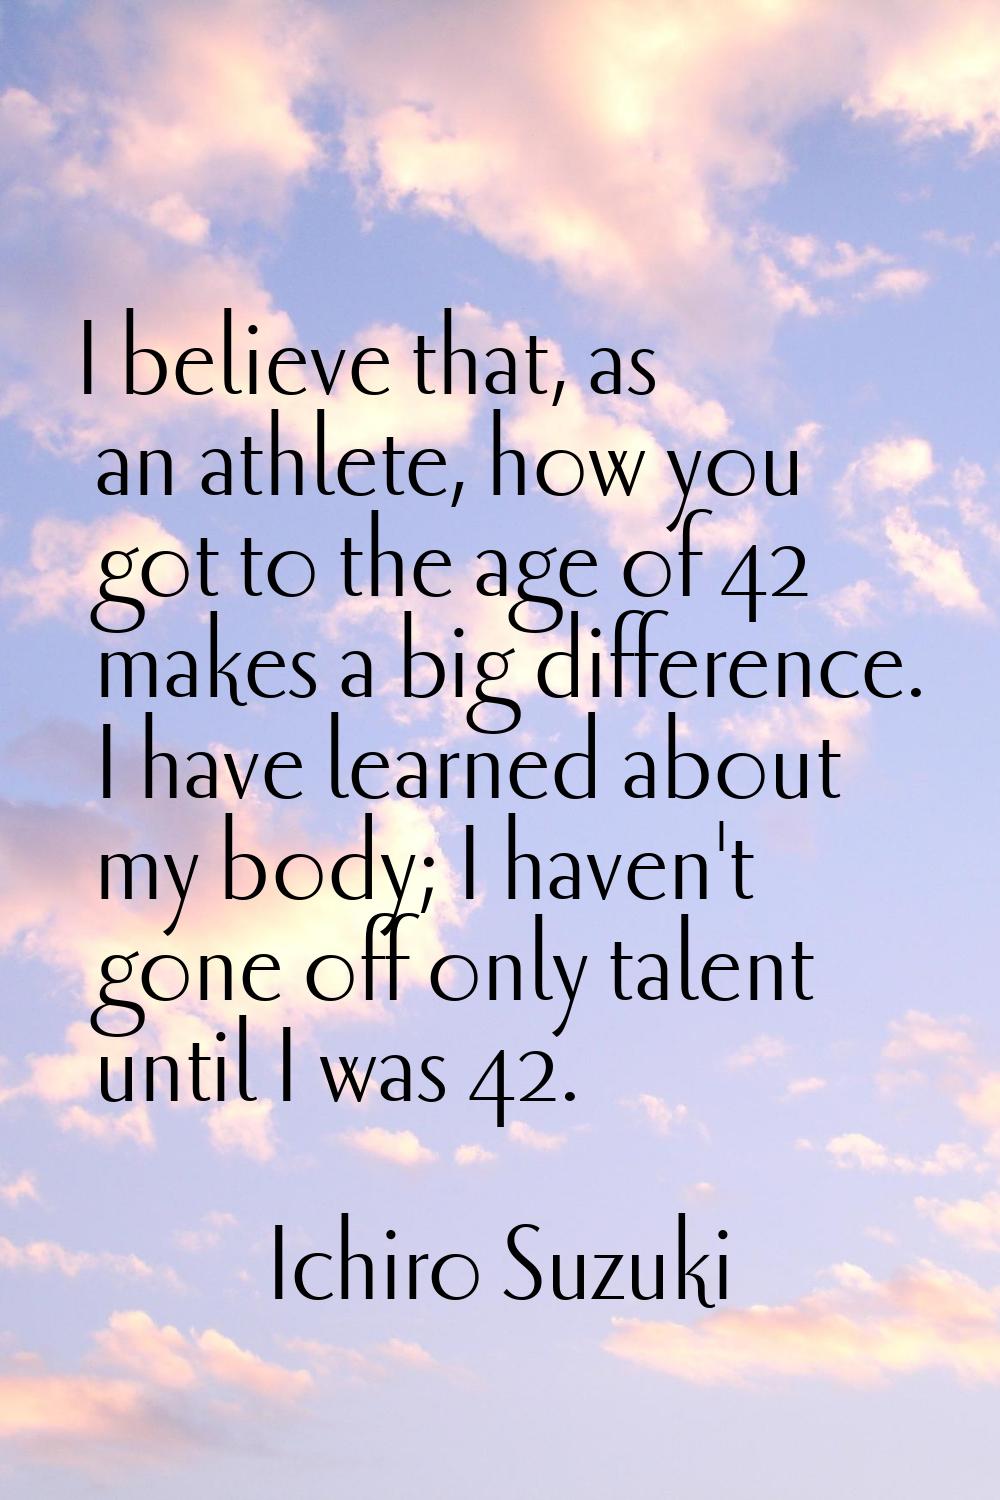 I believe that, as an athlete, how you got to the age of 42 makes a big difference. I have learned 